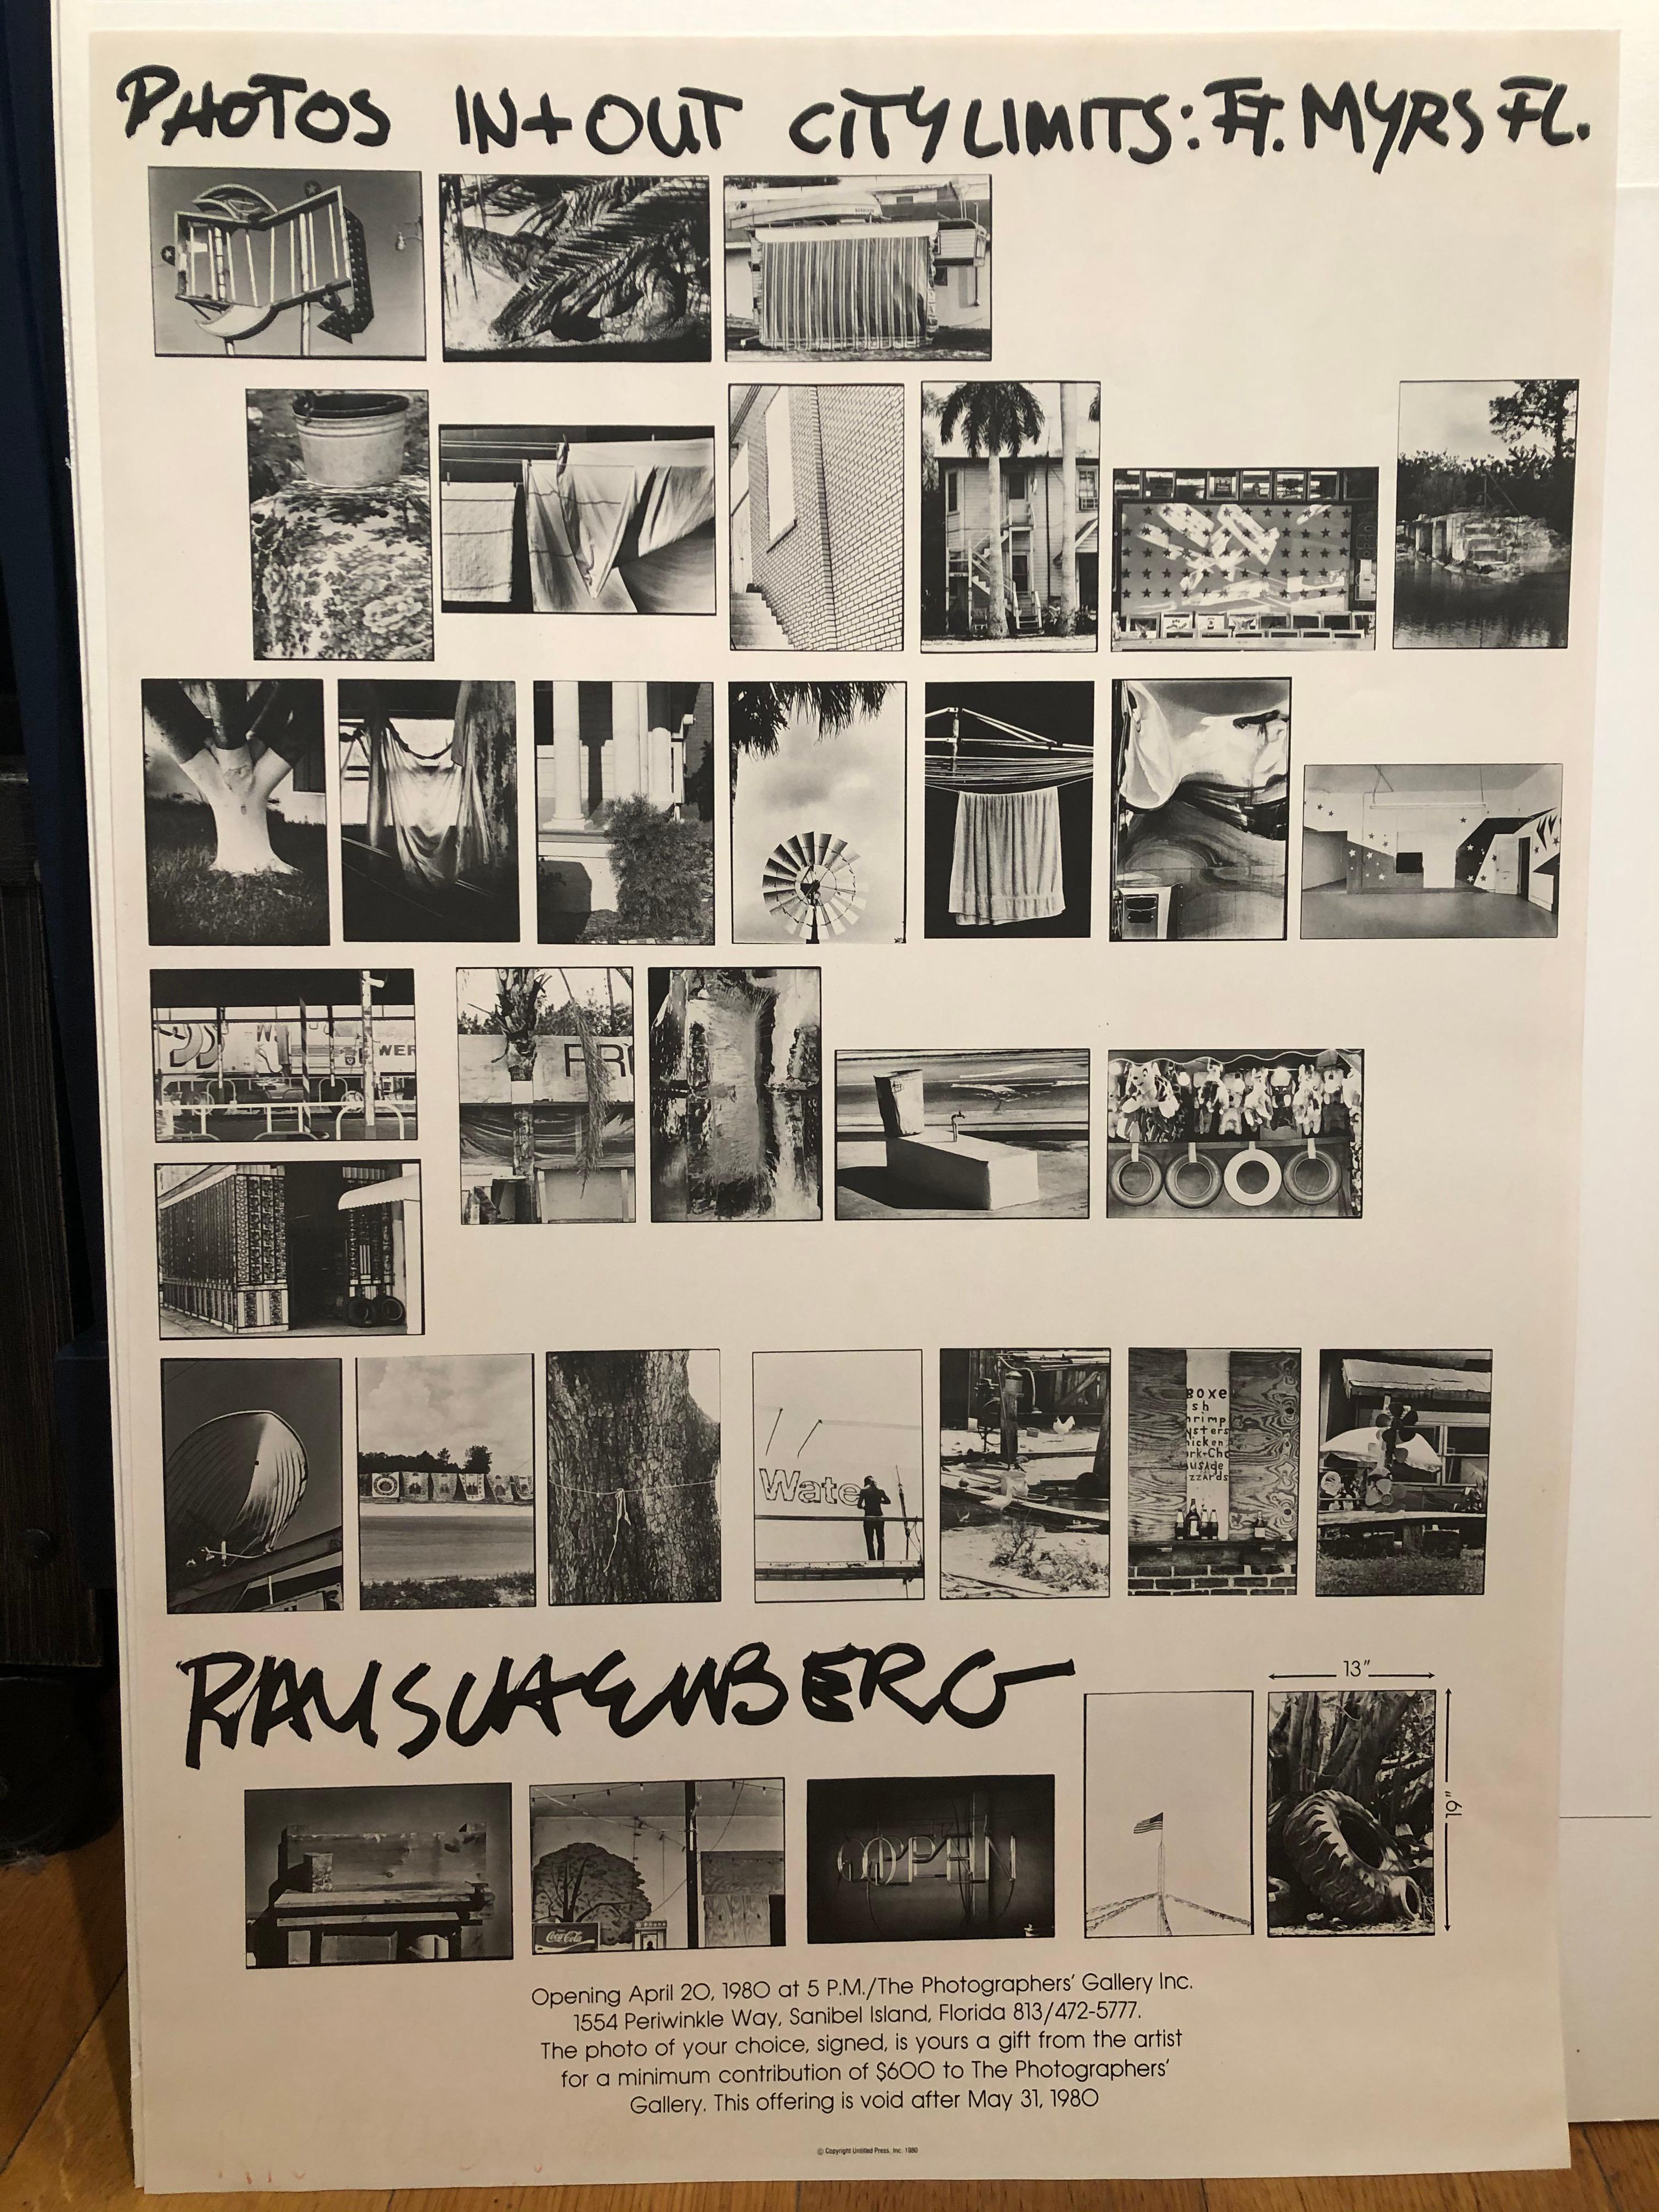 Photos In and Out city limits: Ft. Myrs FL - Post-War Photograph by Robert Rauschenberg